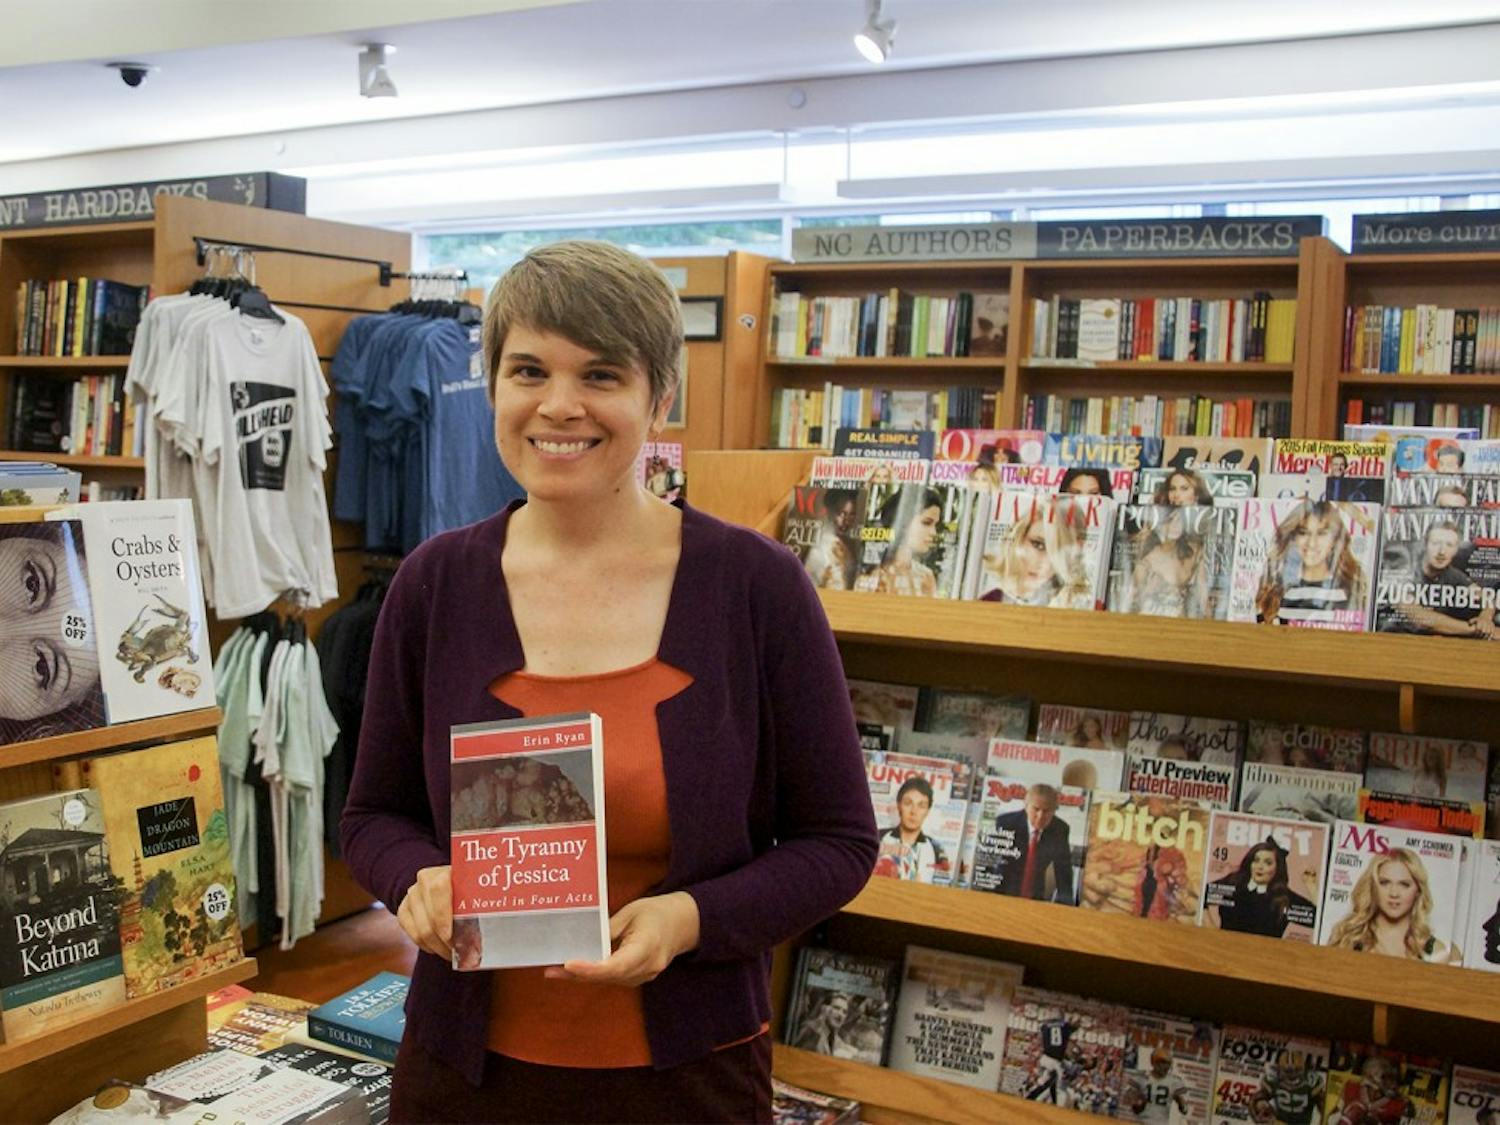 Erin Ryan, a graduate student in the School of Information and Library Sciences, poses with her book “The Tyranny of Jessica.”